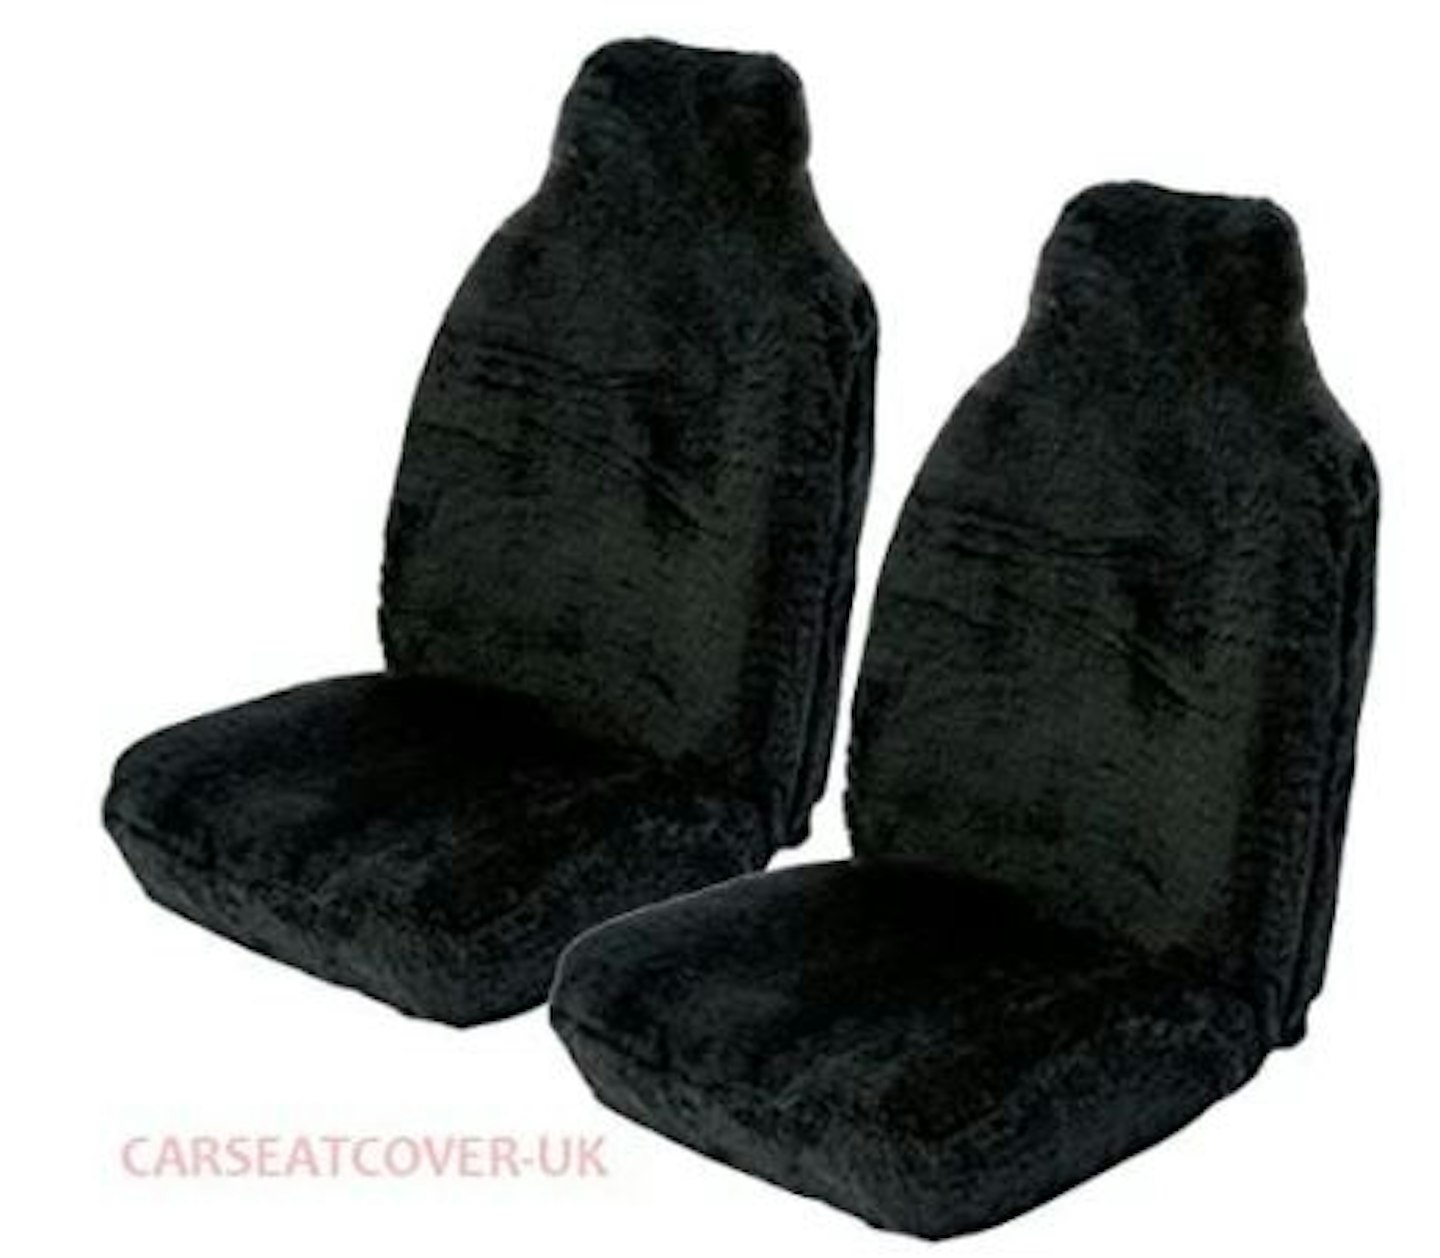 Carseatcover-UK Faux Fur Seat Covers